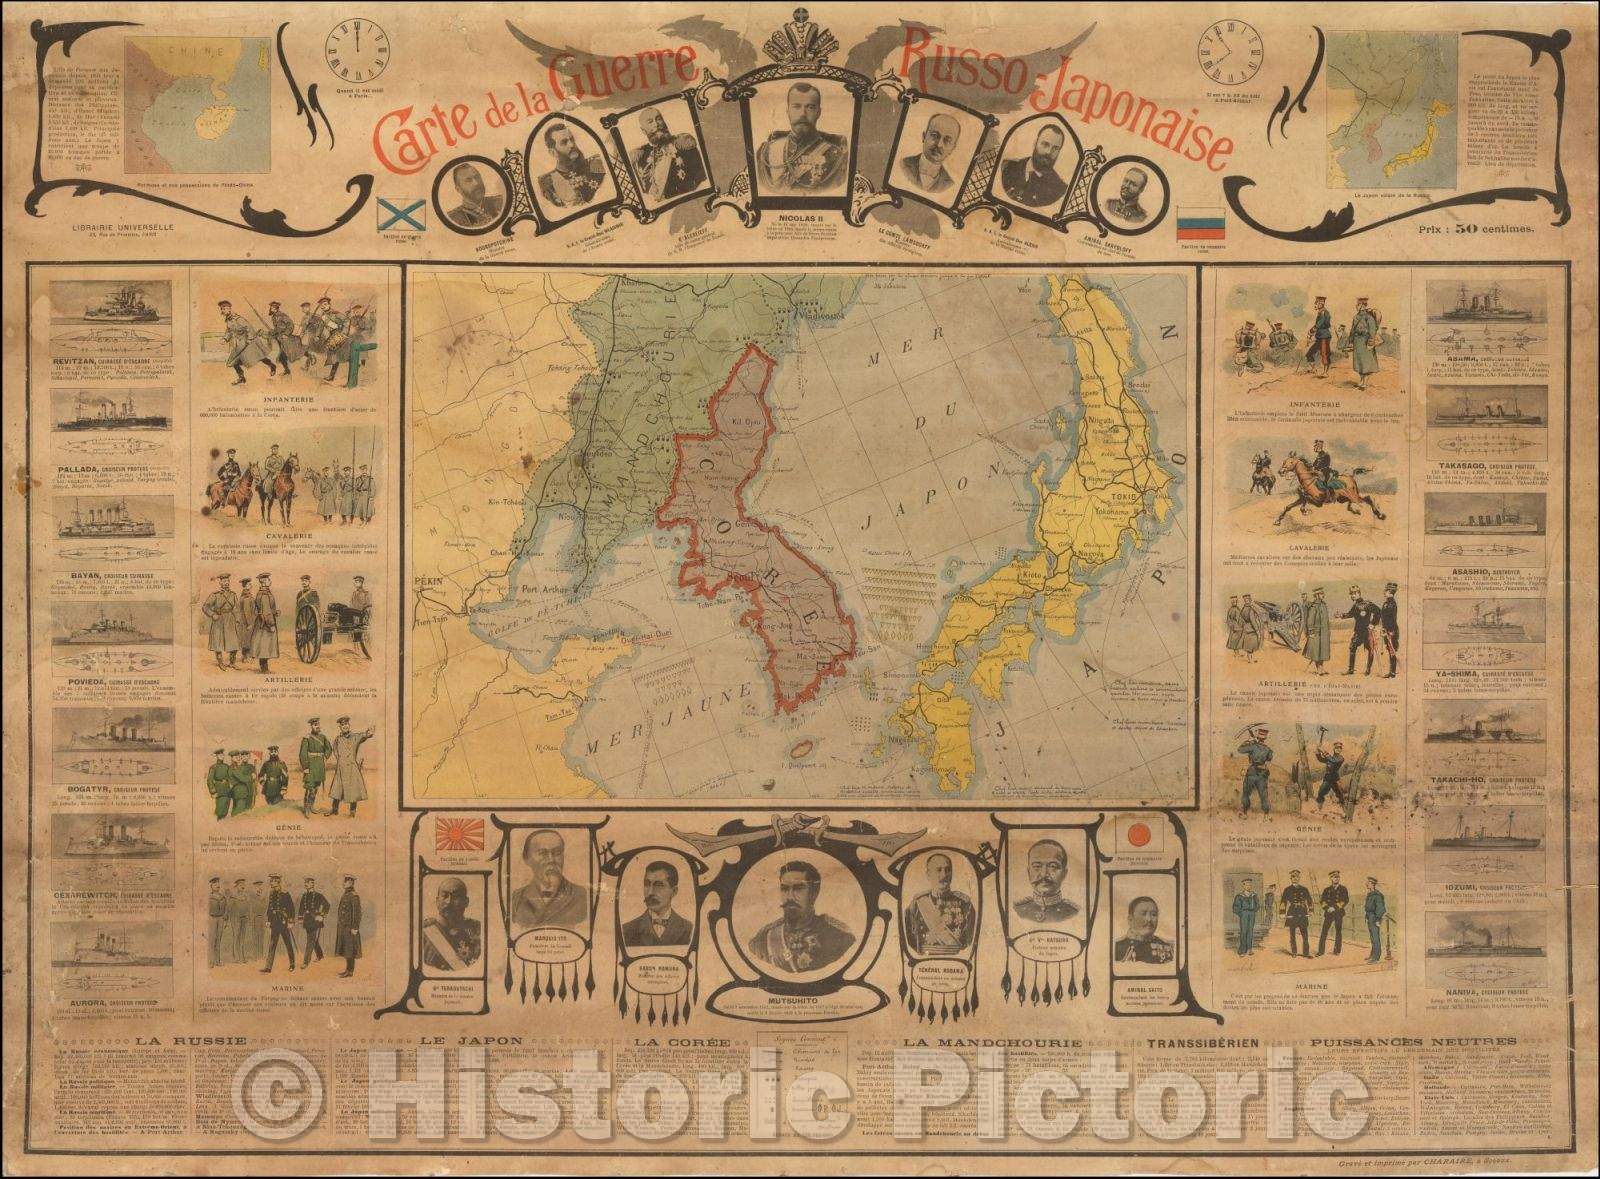 Historic Map - Carte de la Guerre Russo-Japonaise/Pictorial Map of of the Theater of War during the Russo-Japanese War, 1904, Librairie Universelle - Vintage Wall Art